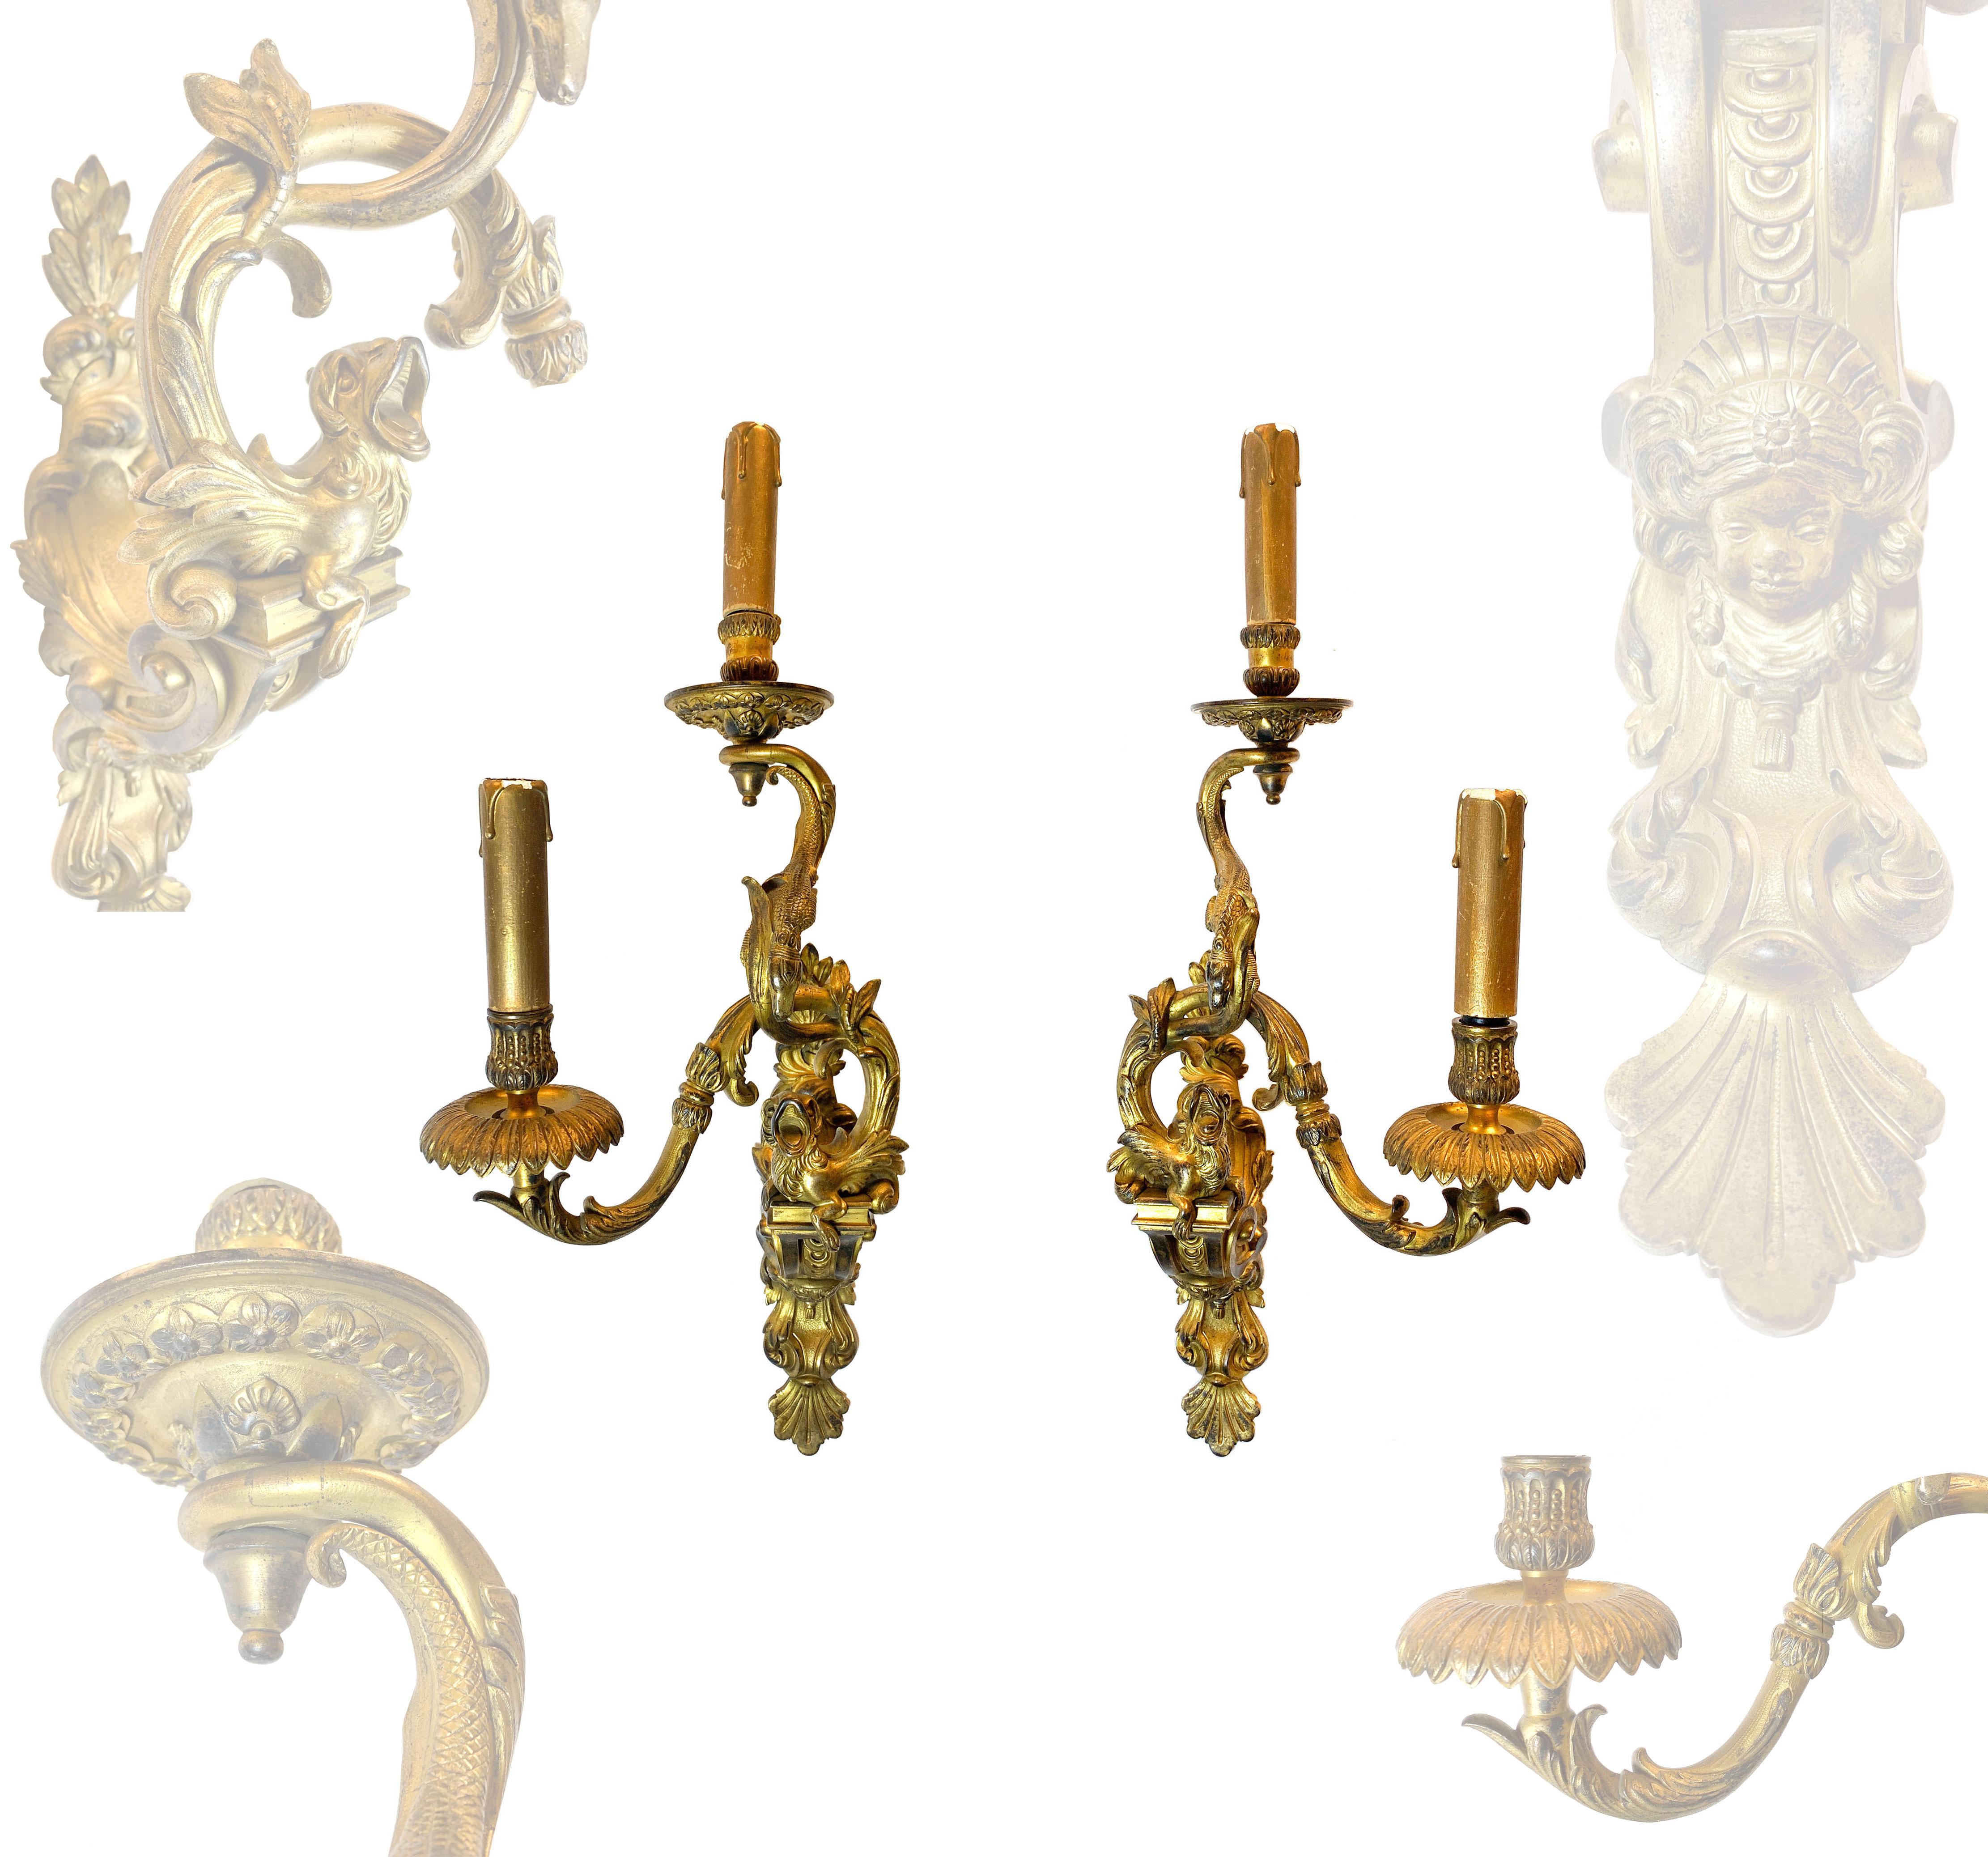 A PAIR OF LOUIS XV STYLE ORMOLU TW0-BRANCH WALL-LIGHTS, 

AFTER A MODEL BY ANDRÉ-CHARLES BOULLE, 19TH CENTURY

Each with foliate-cast backplate surmounted by a dragon and a salamander, issuing assymetric foliate-sheathed candlebranches. 

H: